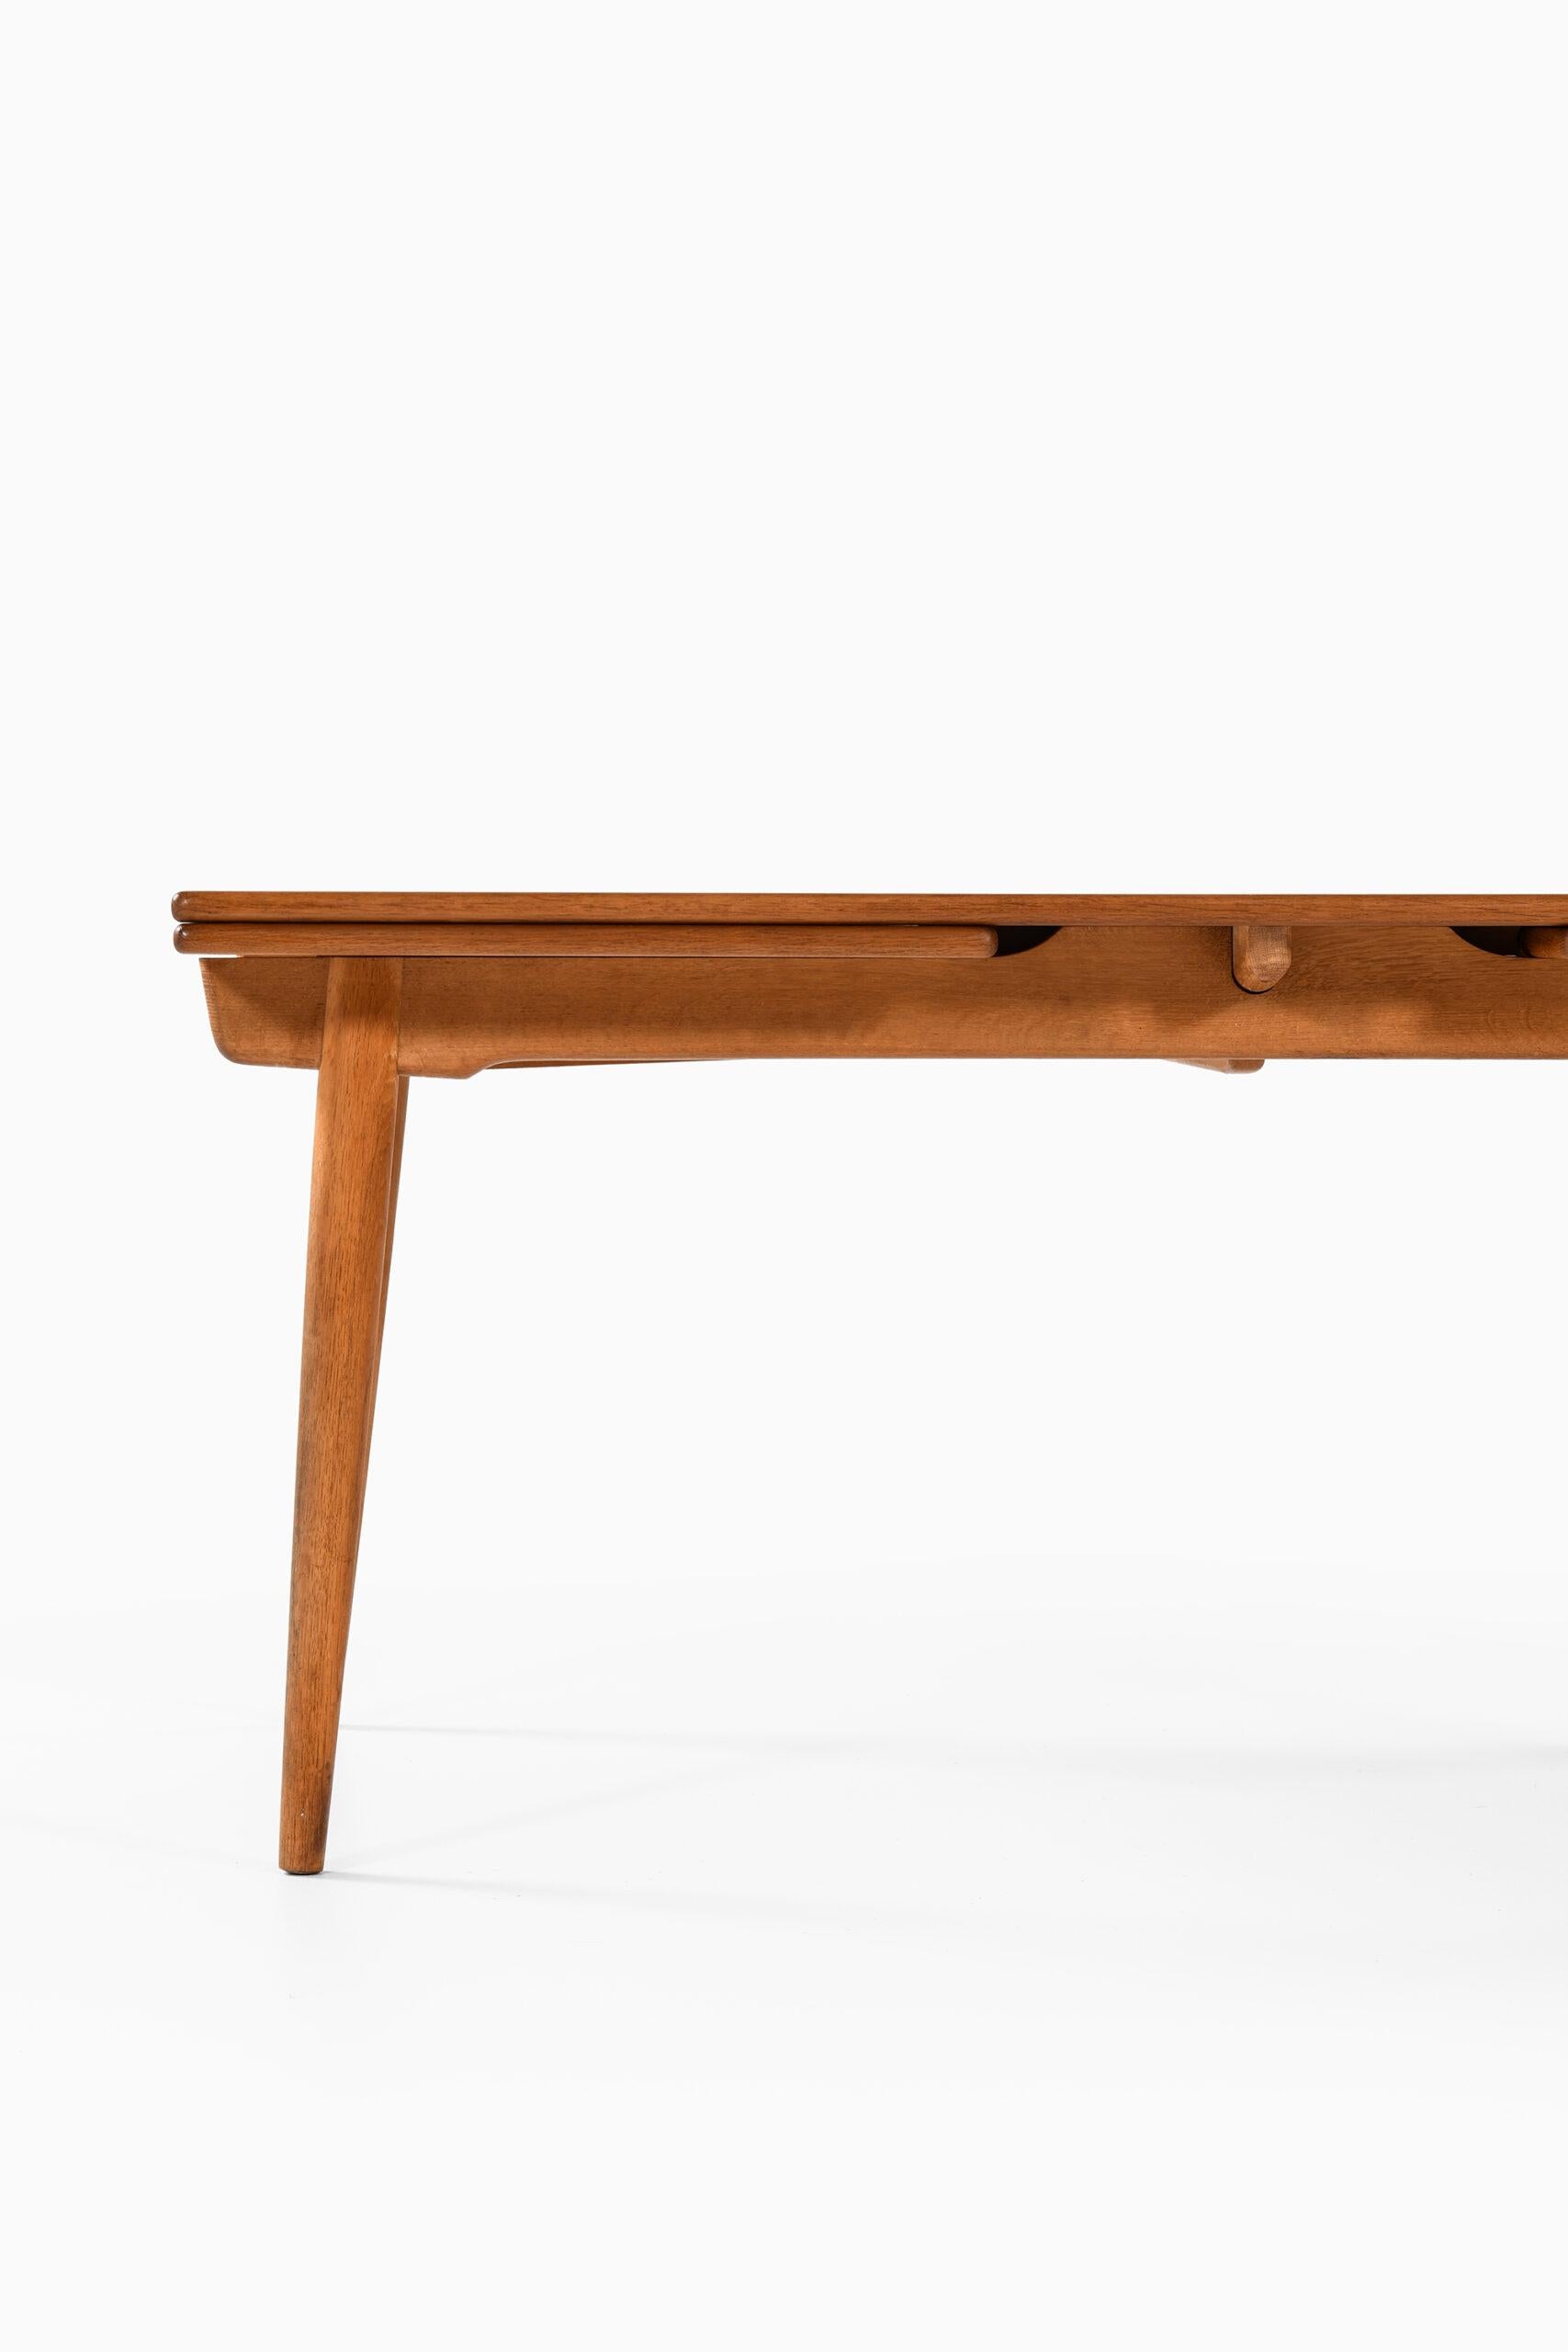 Dining table model AT-312 designed by Hans Wegner. Produced by Andreas Tuck in Denmark. Dimensions (W x D x H): 160 ( 280 ) x 100 x 71,5 cm.